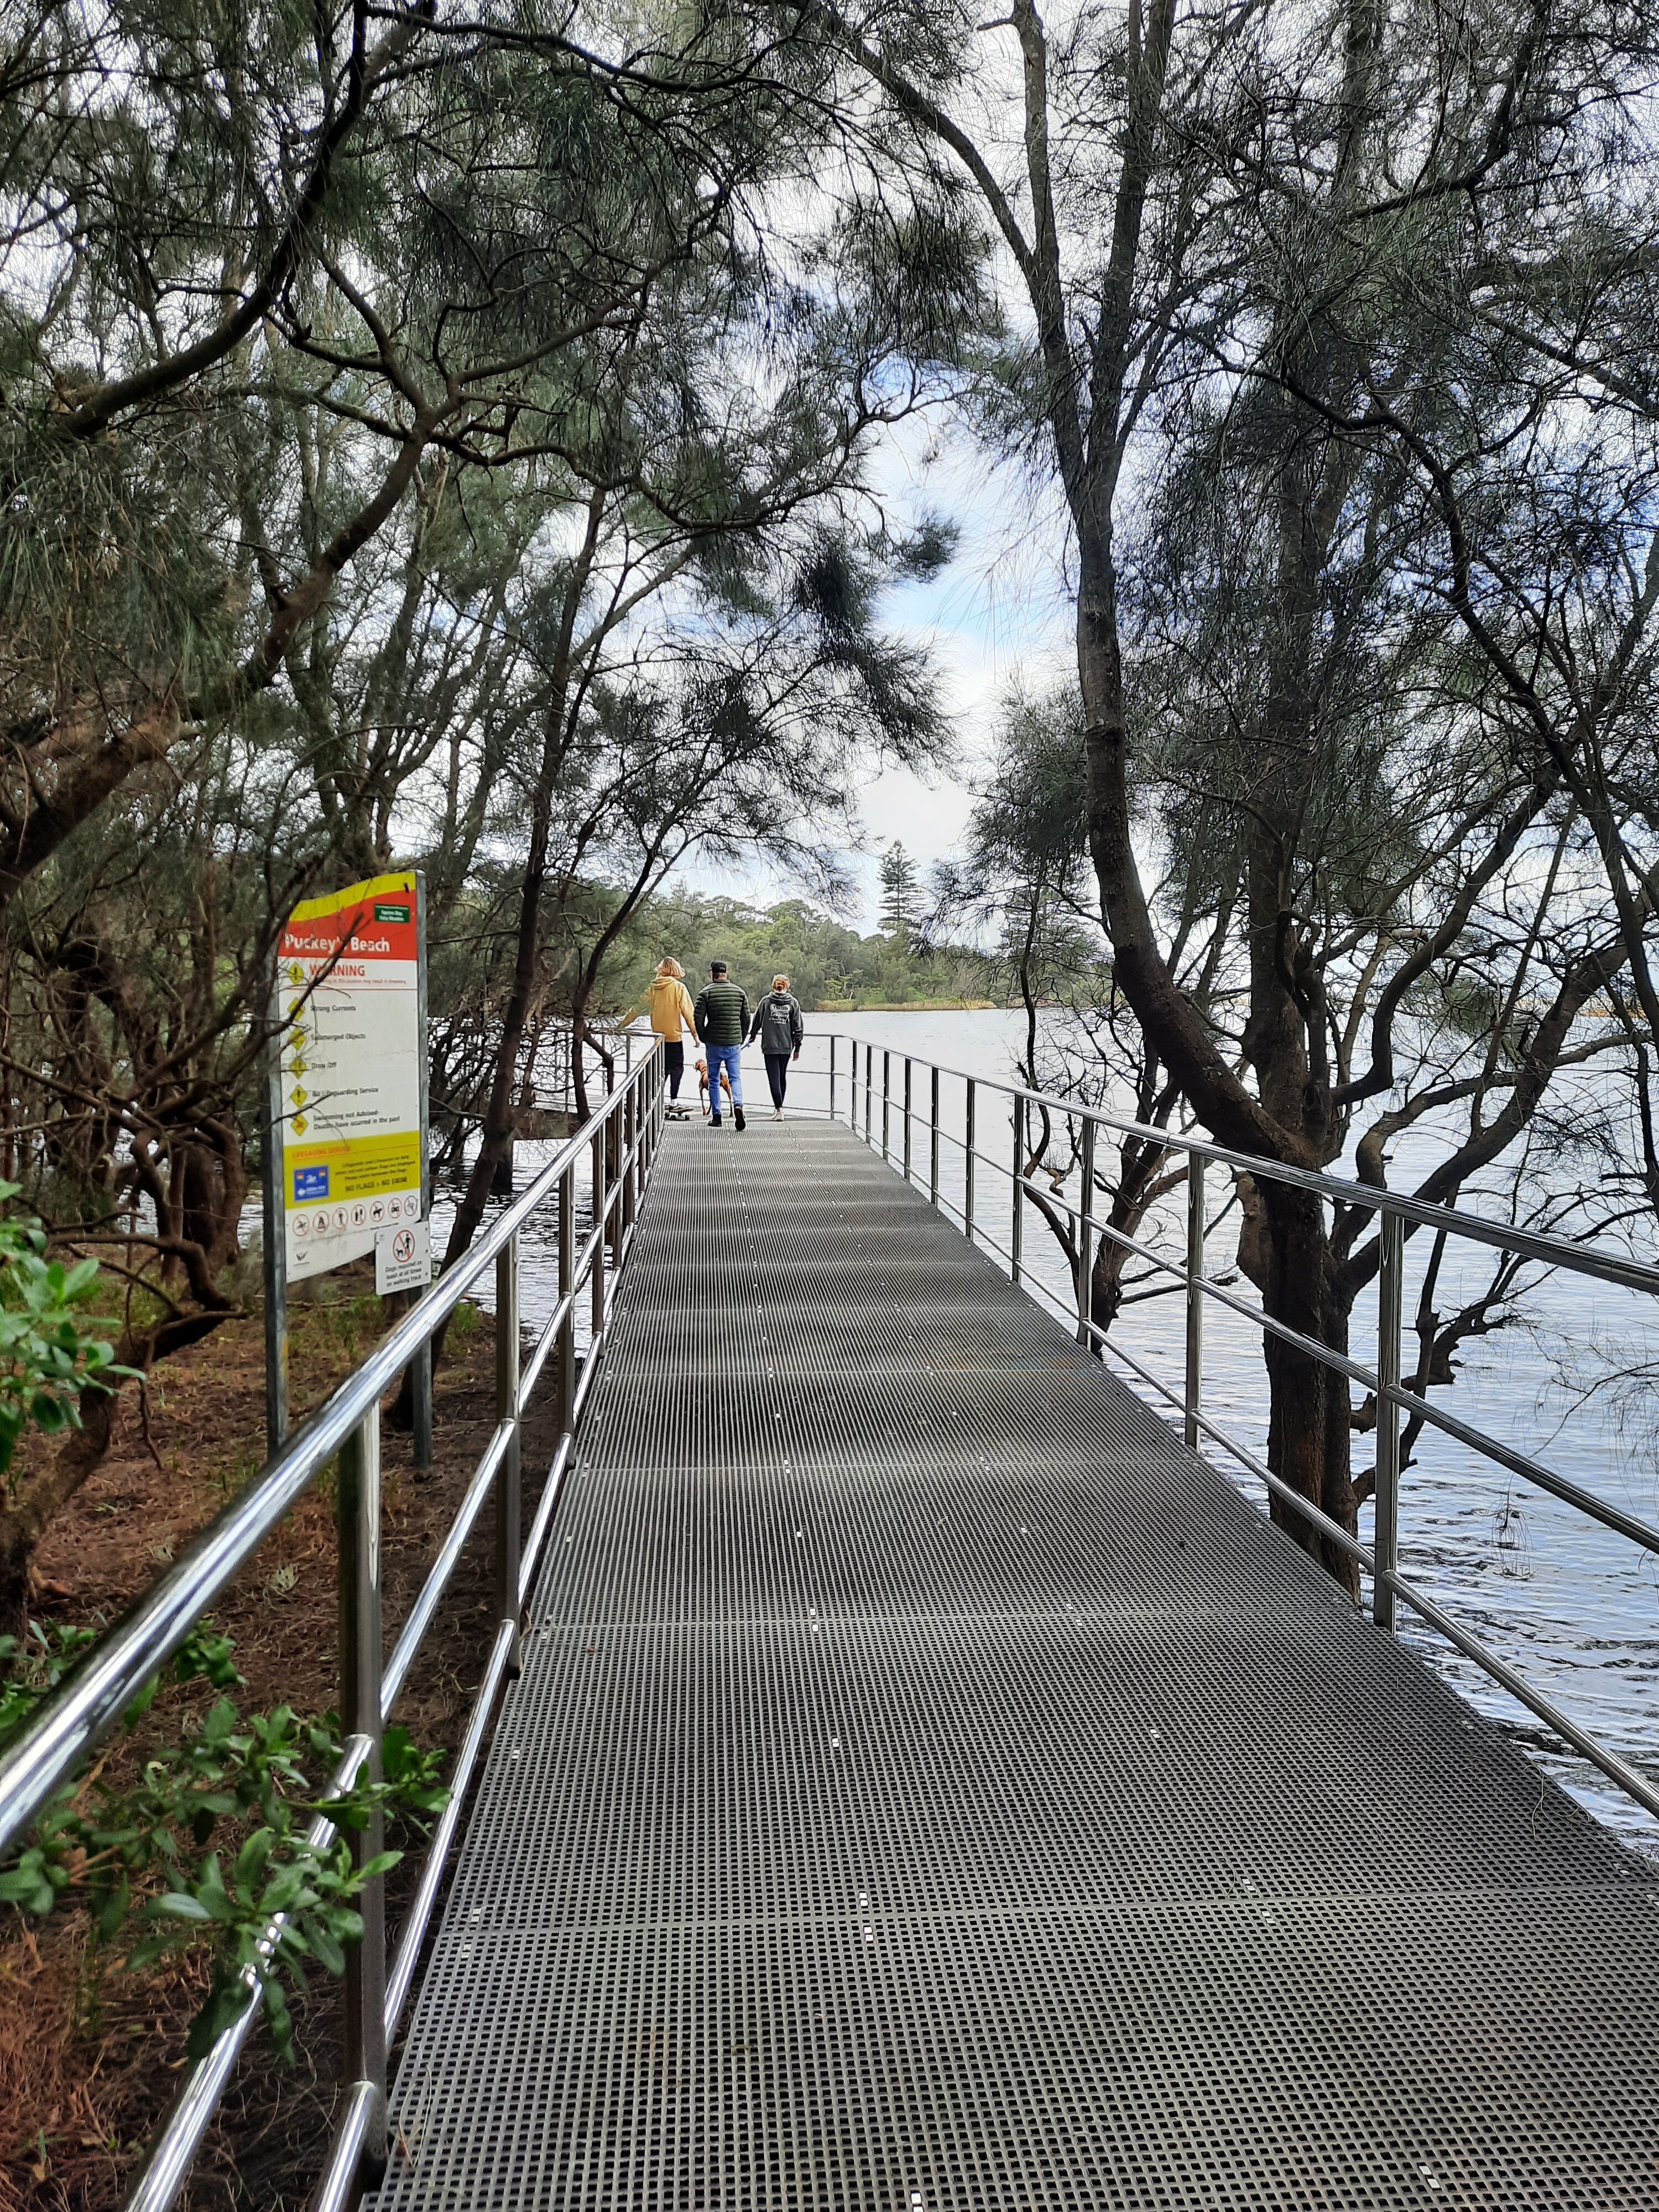 Raised boardwalks and signage, Puckey's Estate Nature Reserve 